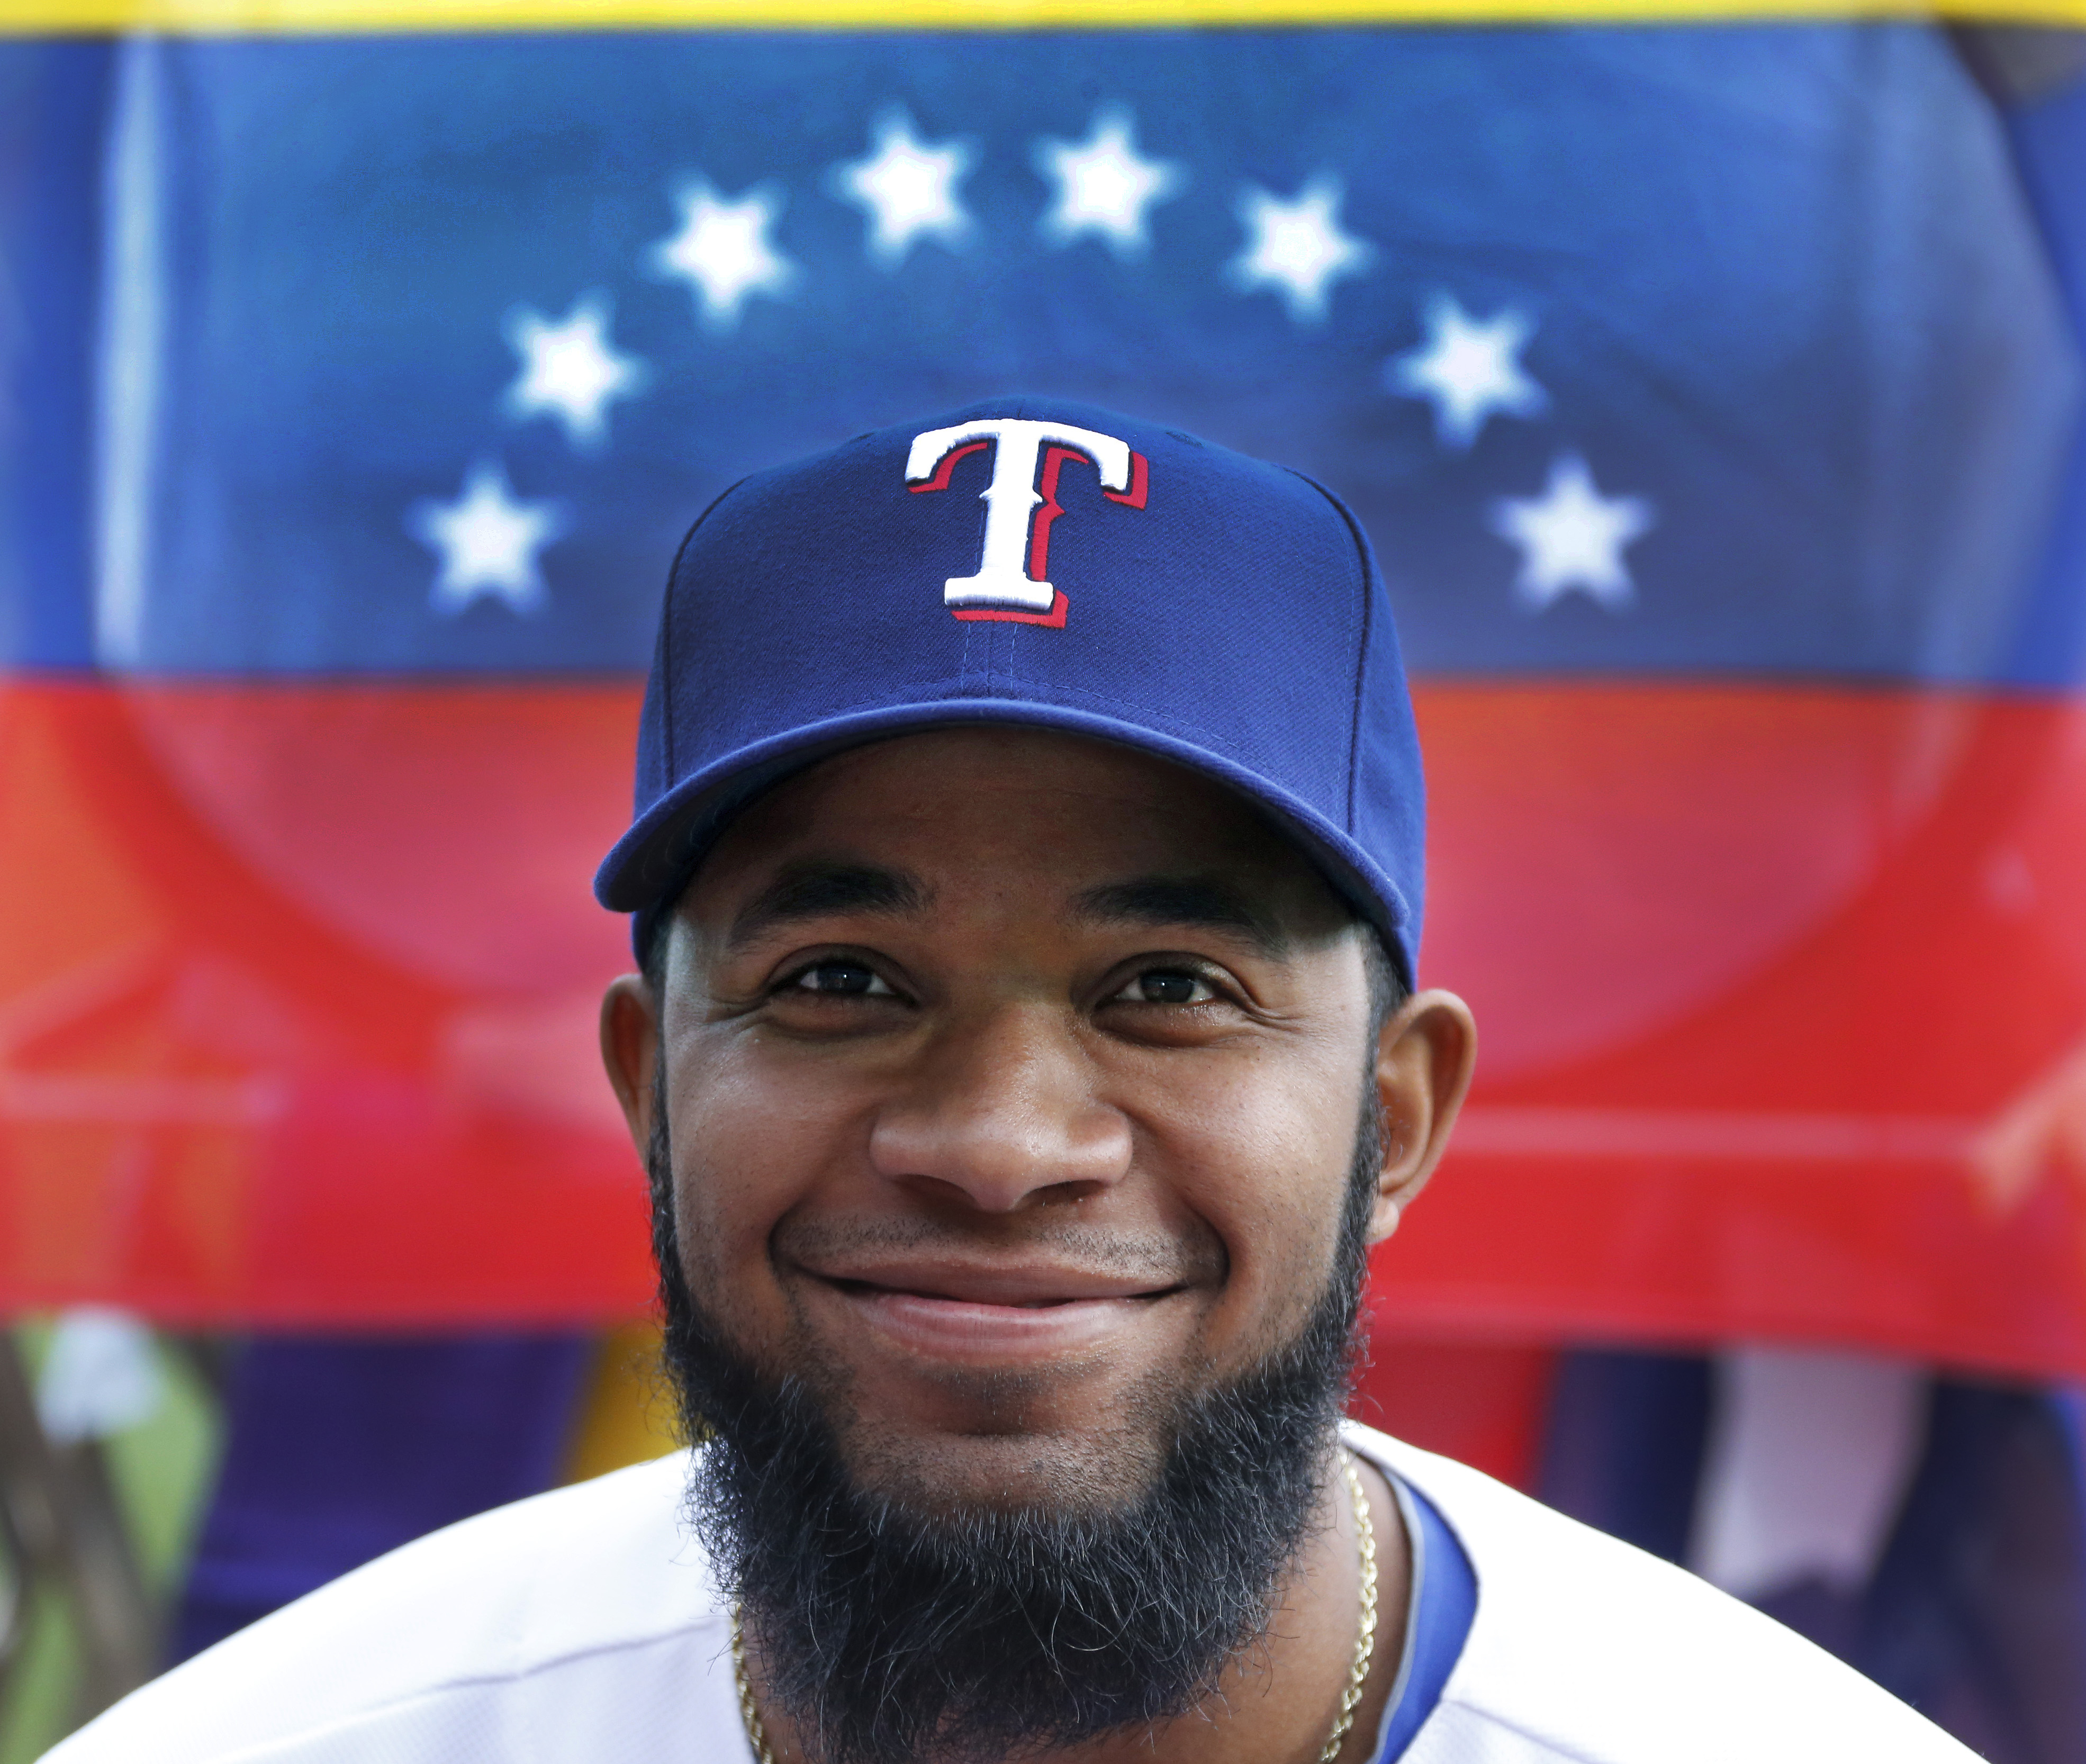 Rangers Elvis Andrus vacation in France, Italy